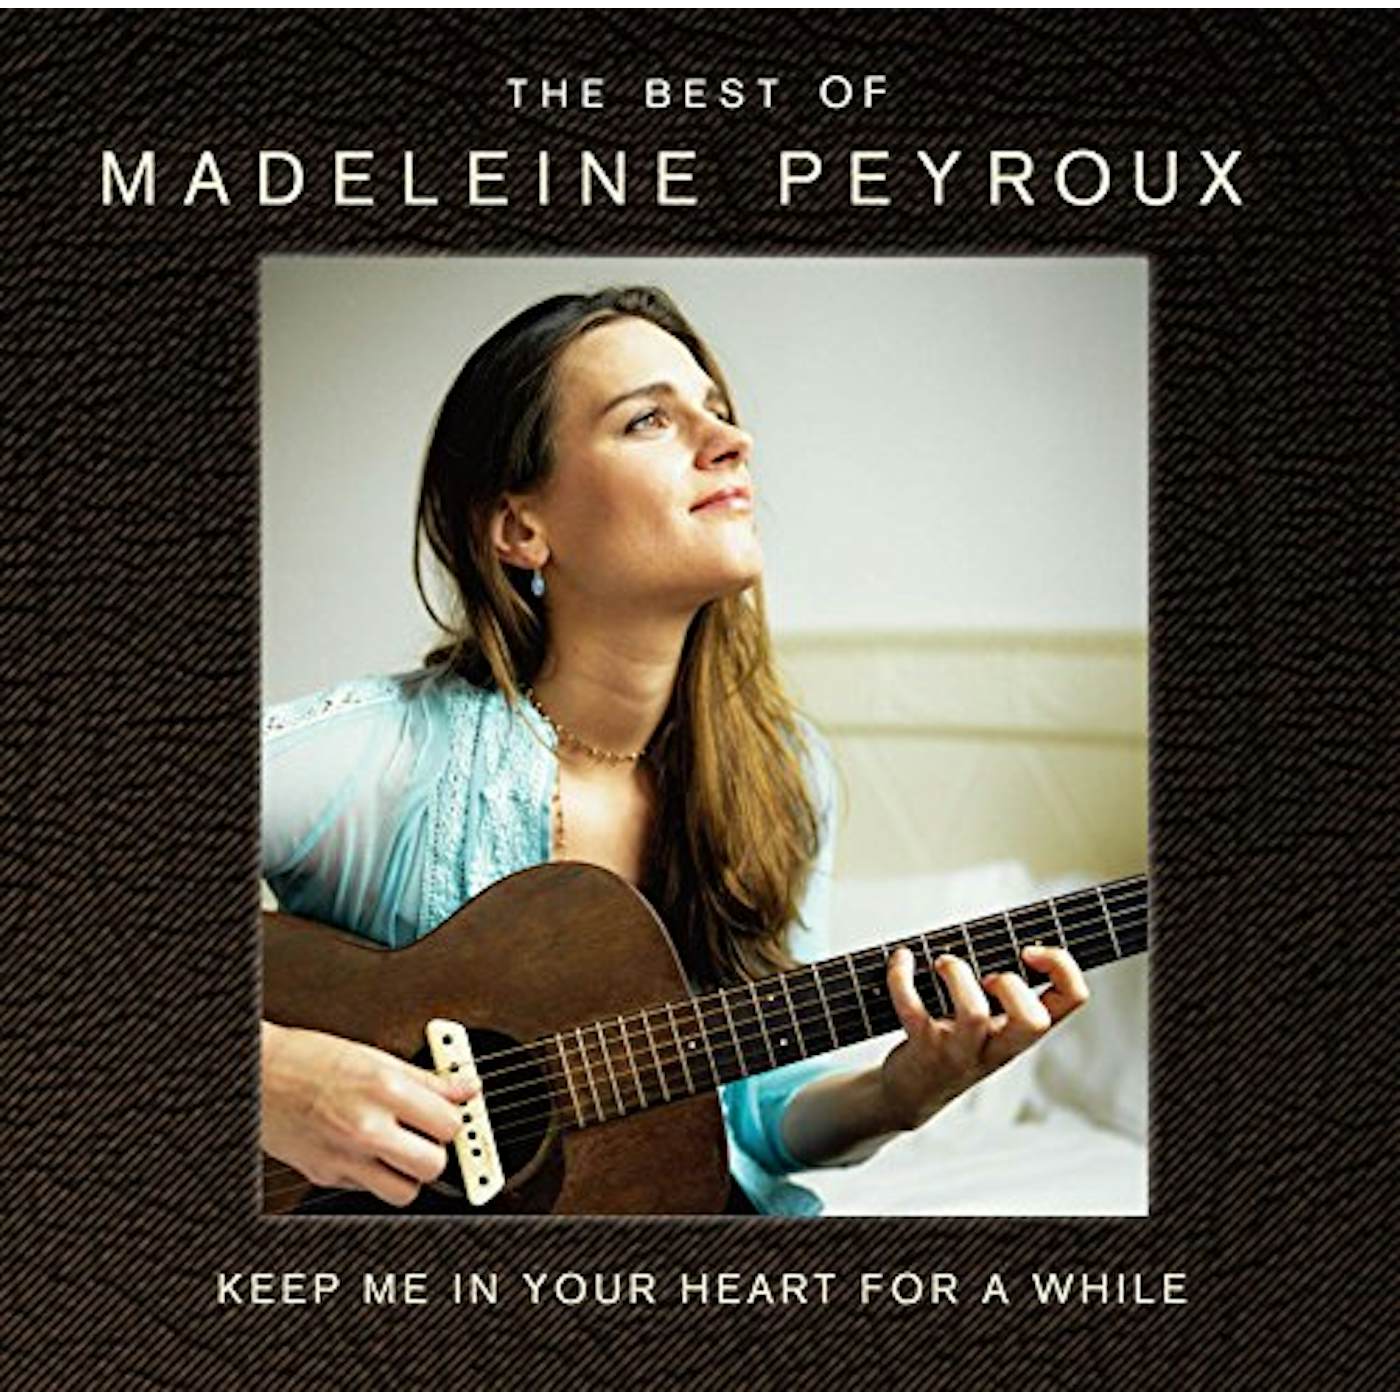 Madeleine Peyroux KEEP ME IN YOUR HEART FOR A WHILE CD